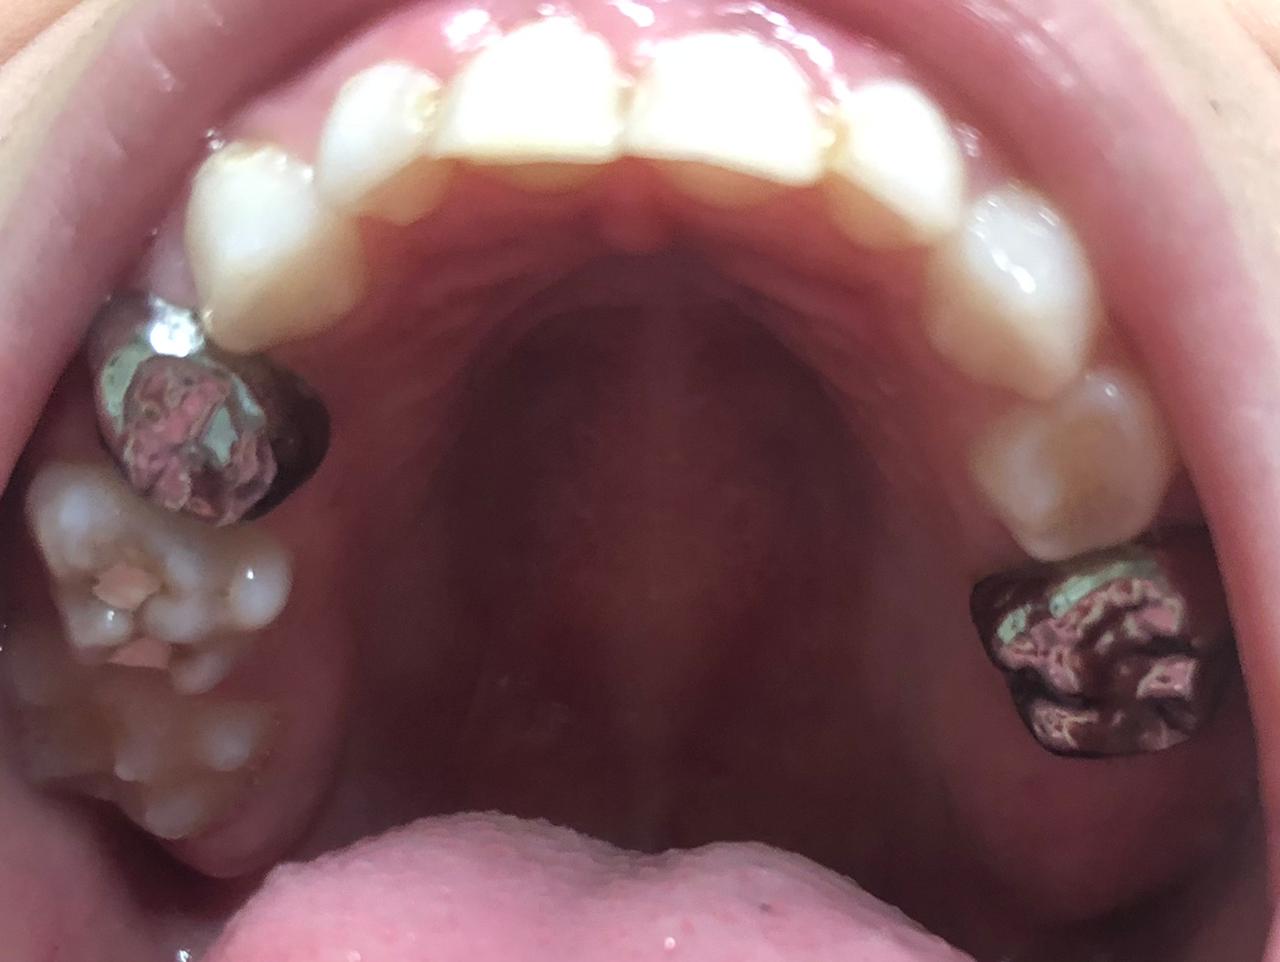 Stainless steel crowns in primary dentition